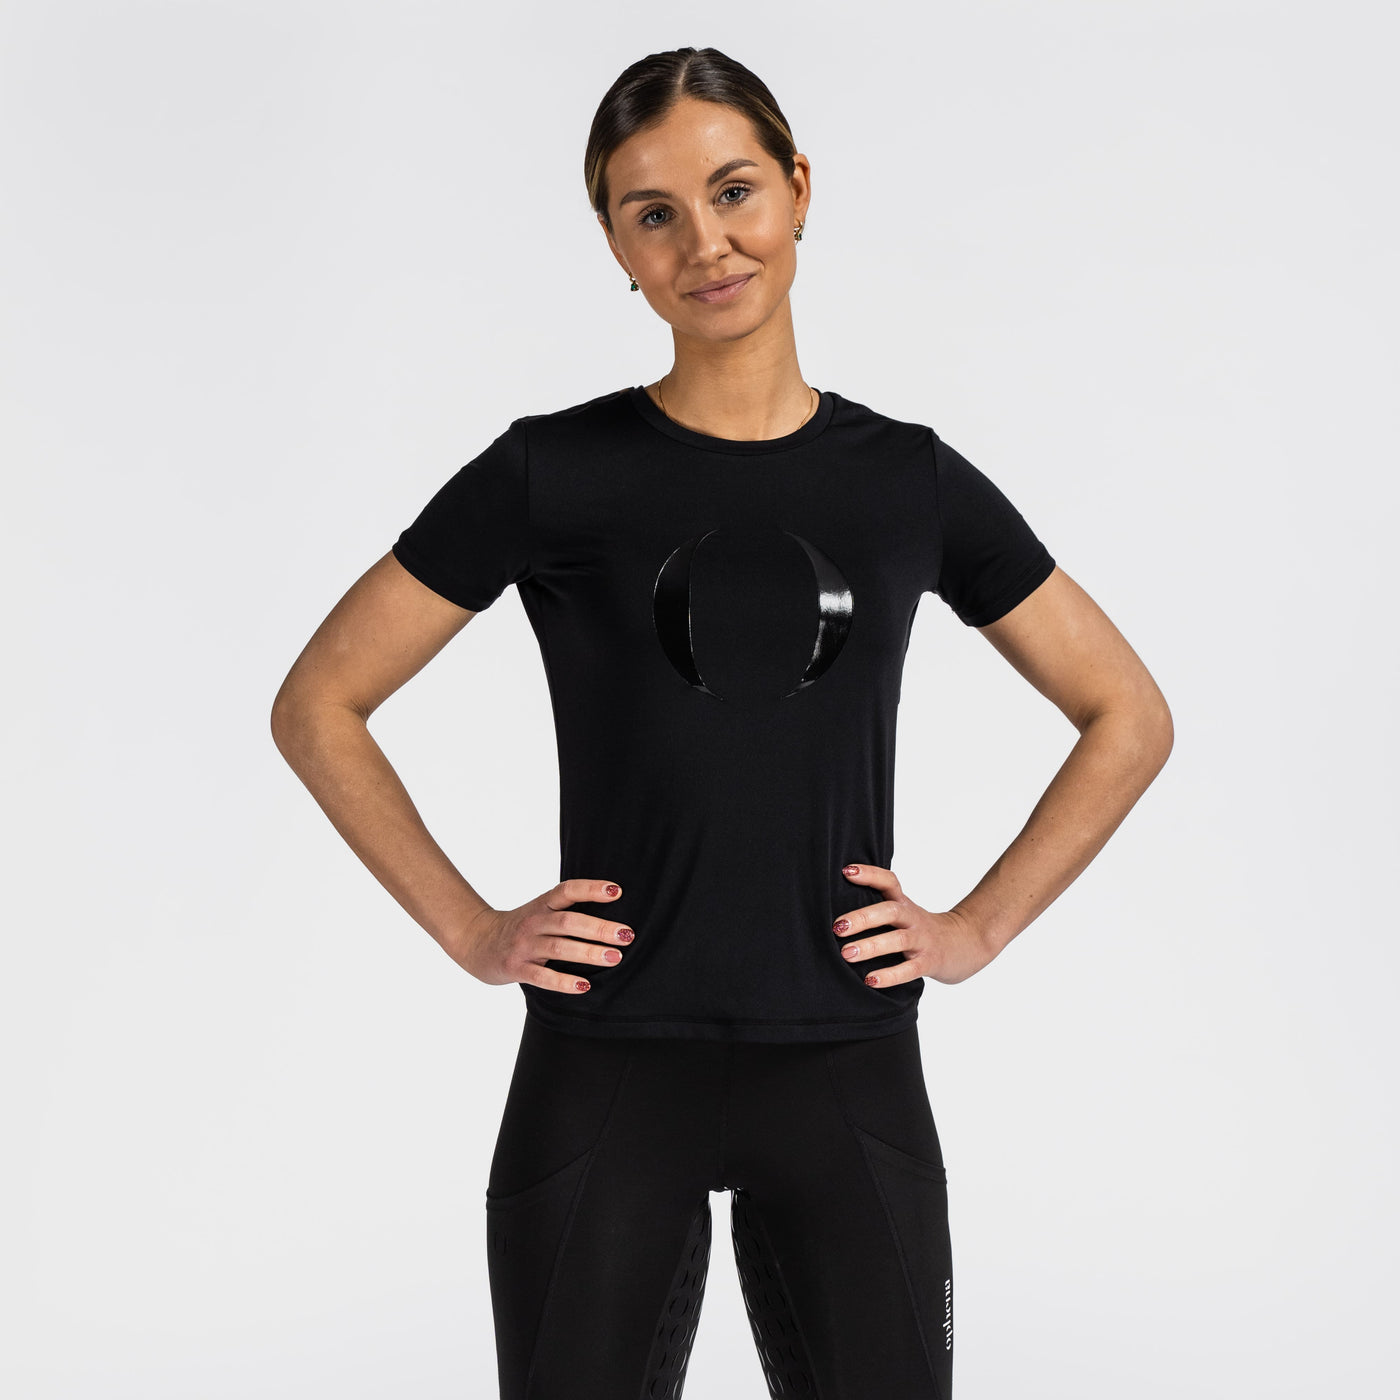 Active T-Shirt Black Signature Collection ??size_XS-height_172-chest_86-waist_71-hips_96